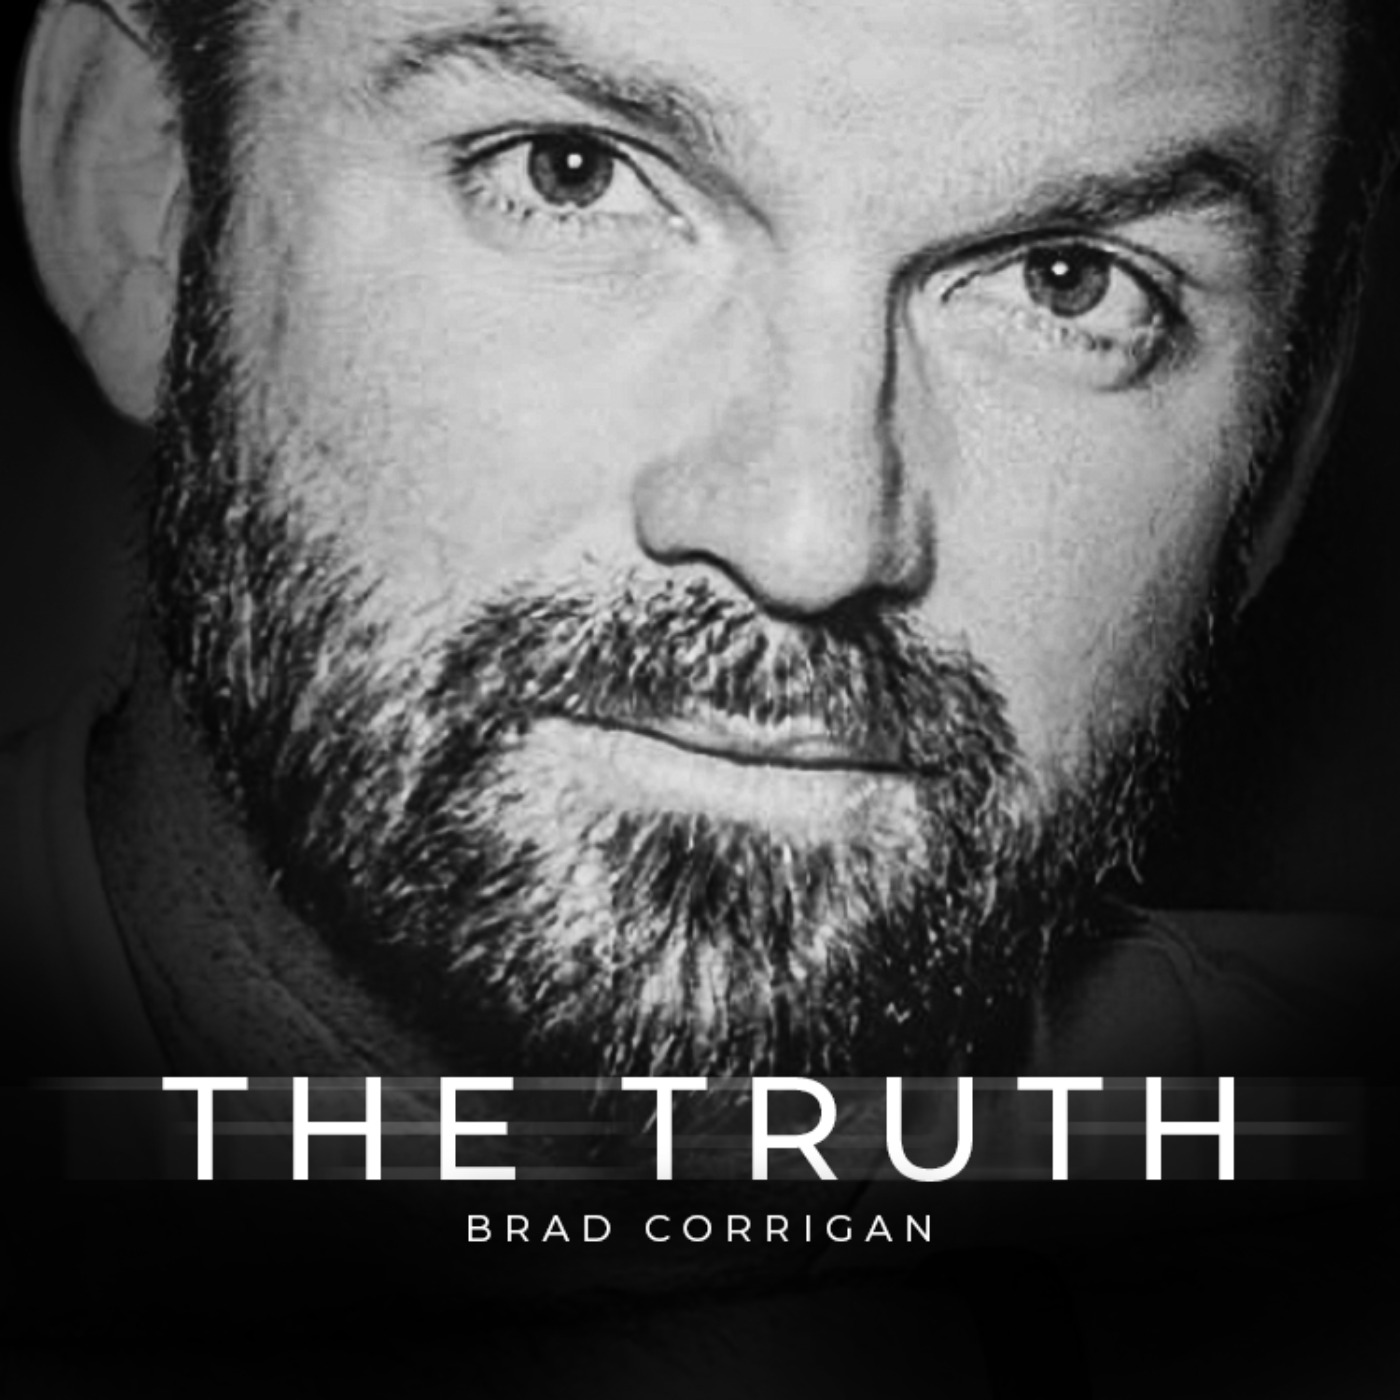 We Are Sold a Lie - Brad Corrigan Reveals The Truth